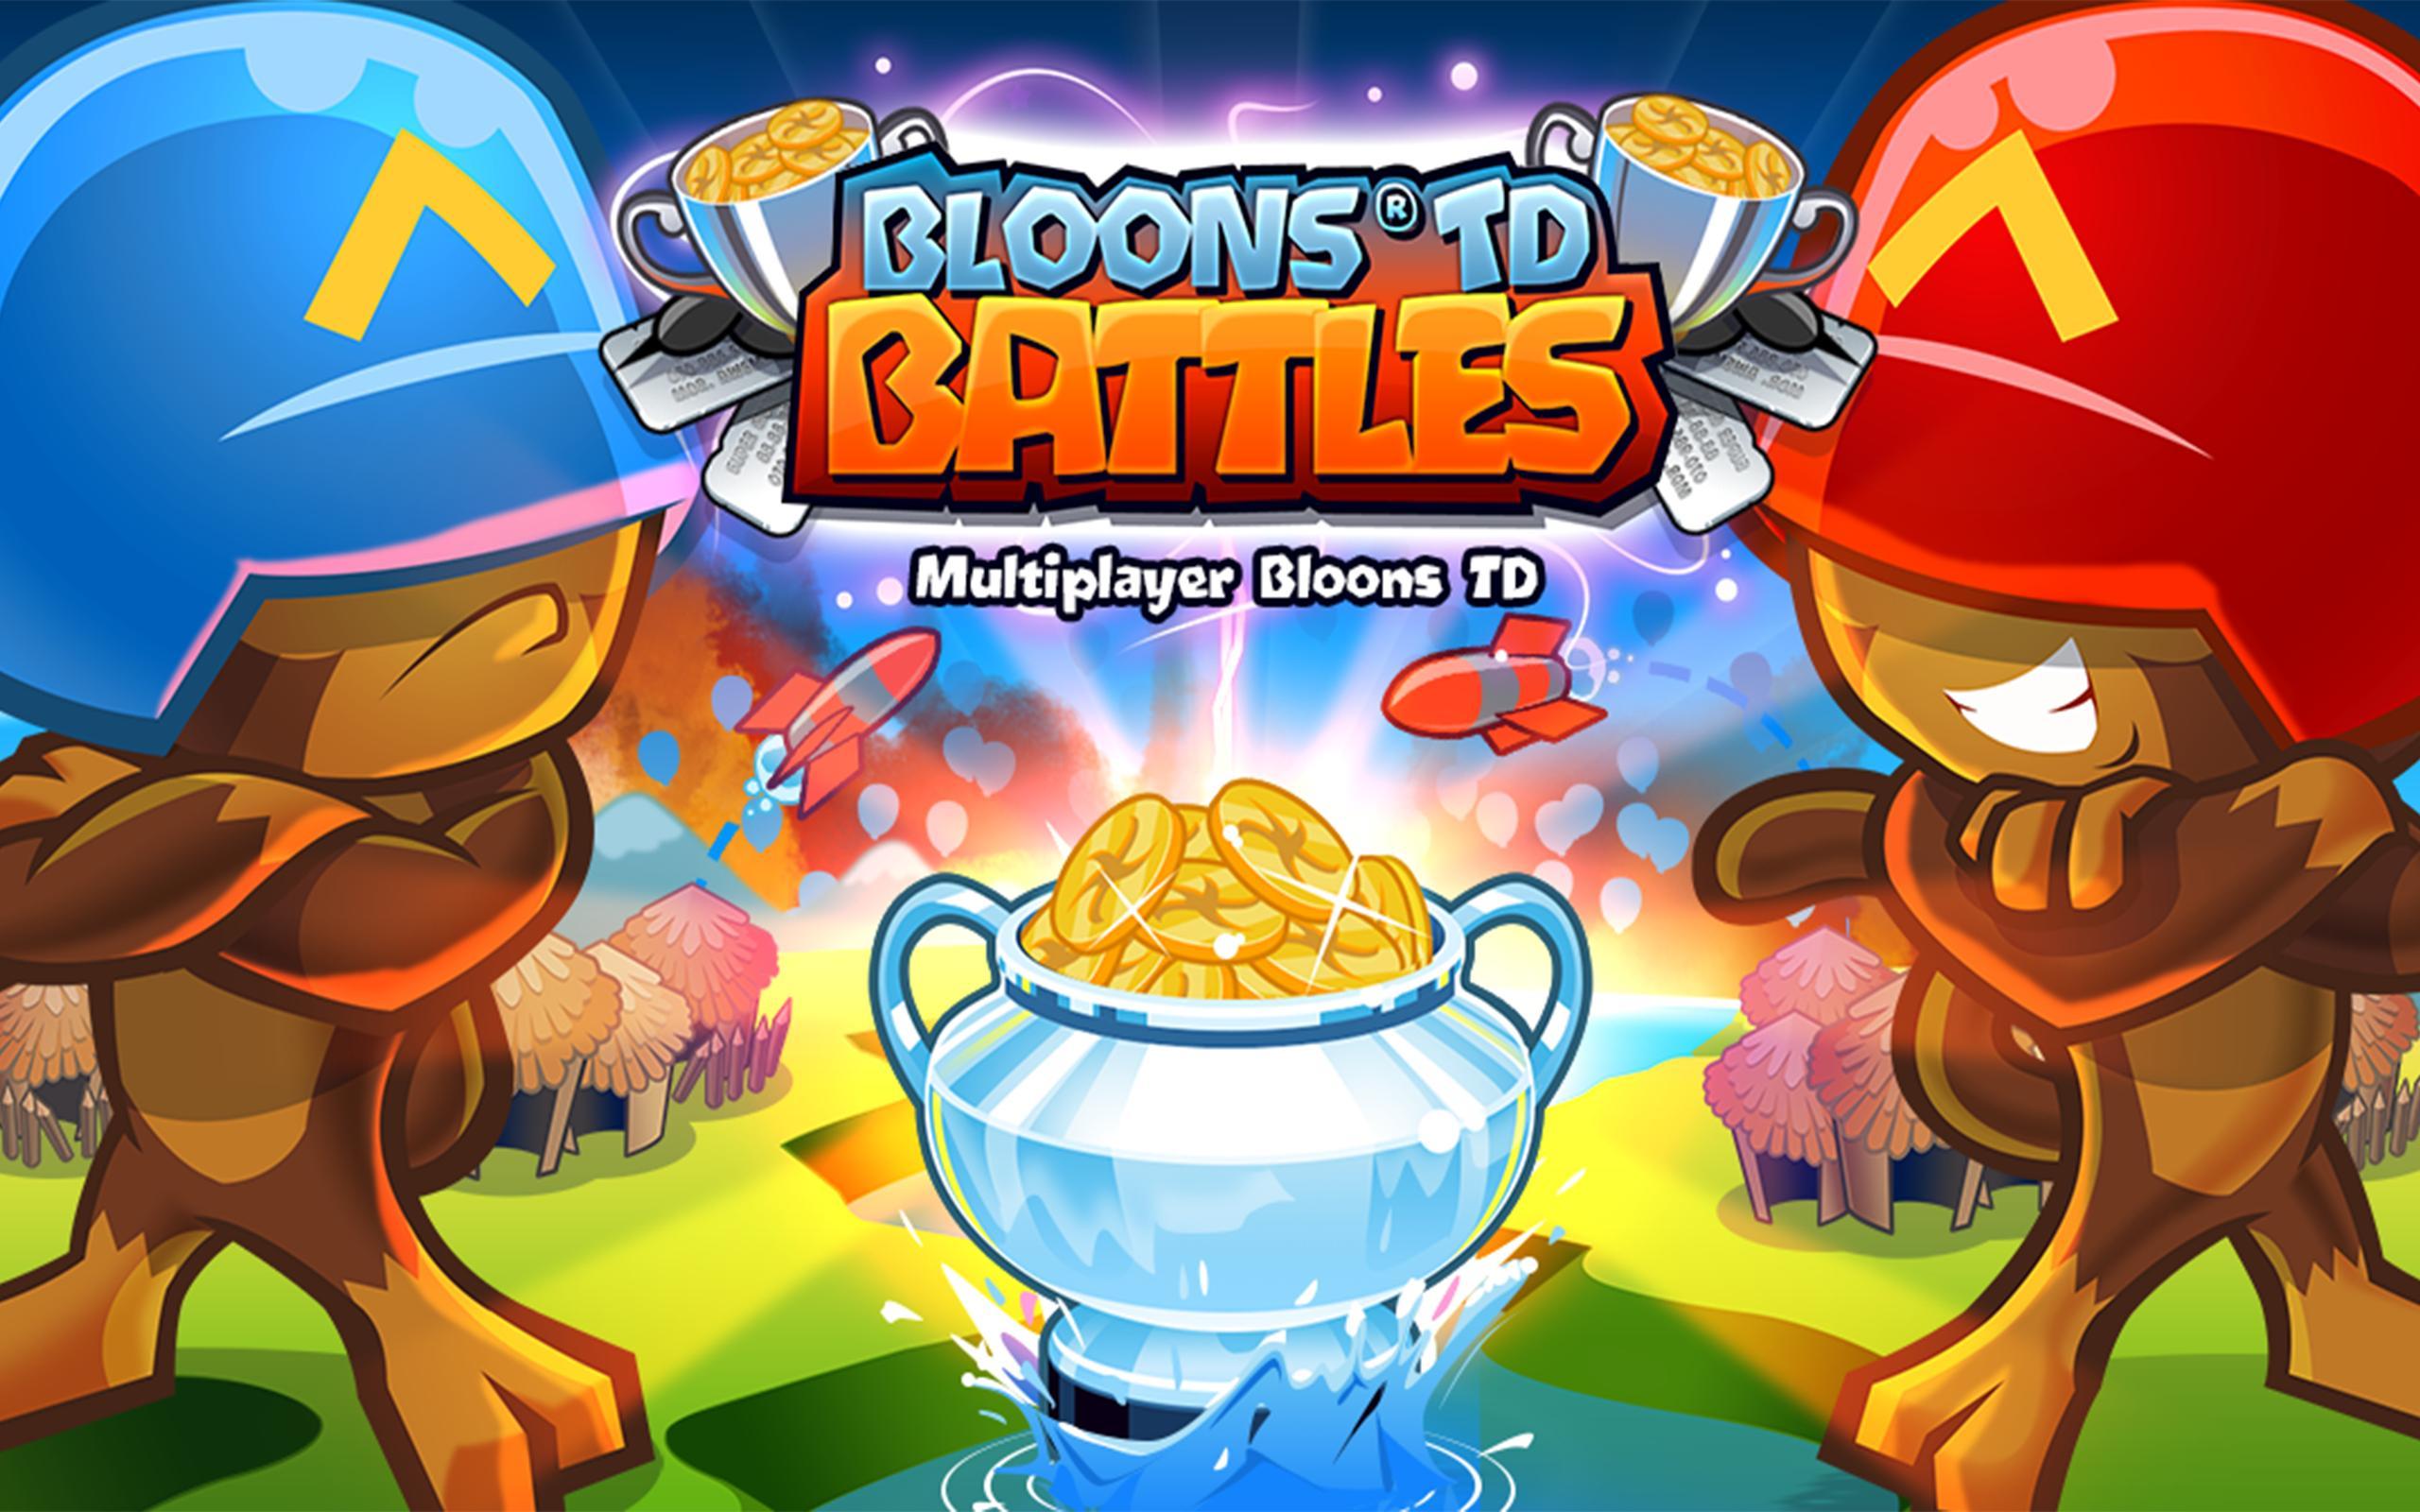 Bloons TD Battles for Android